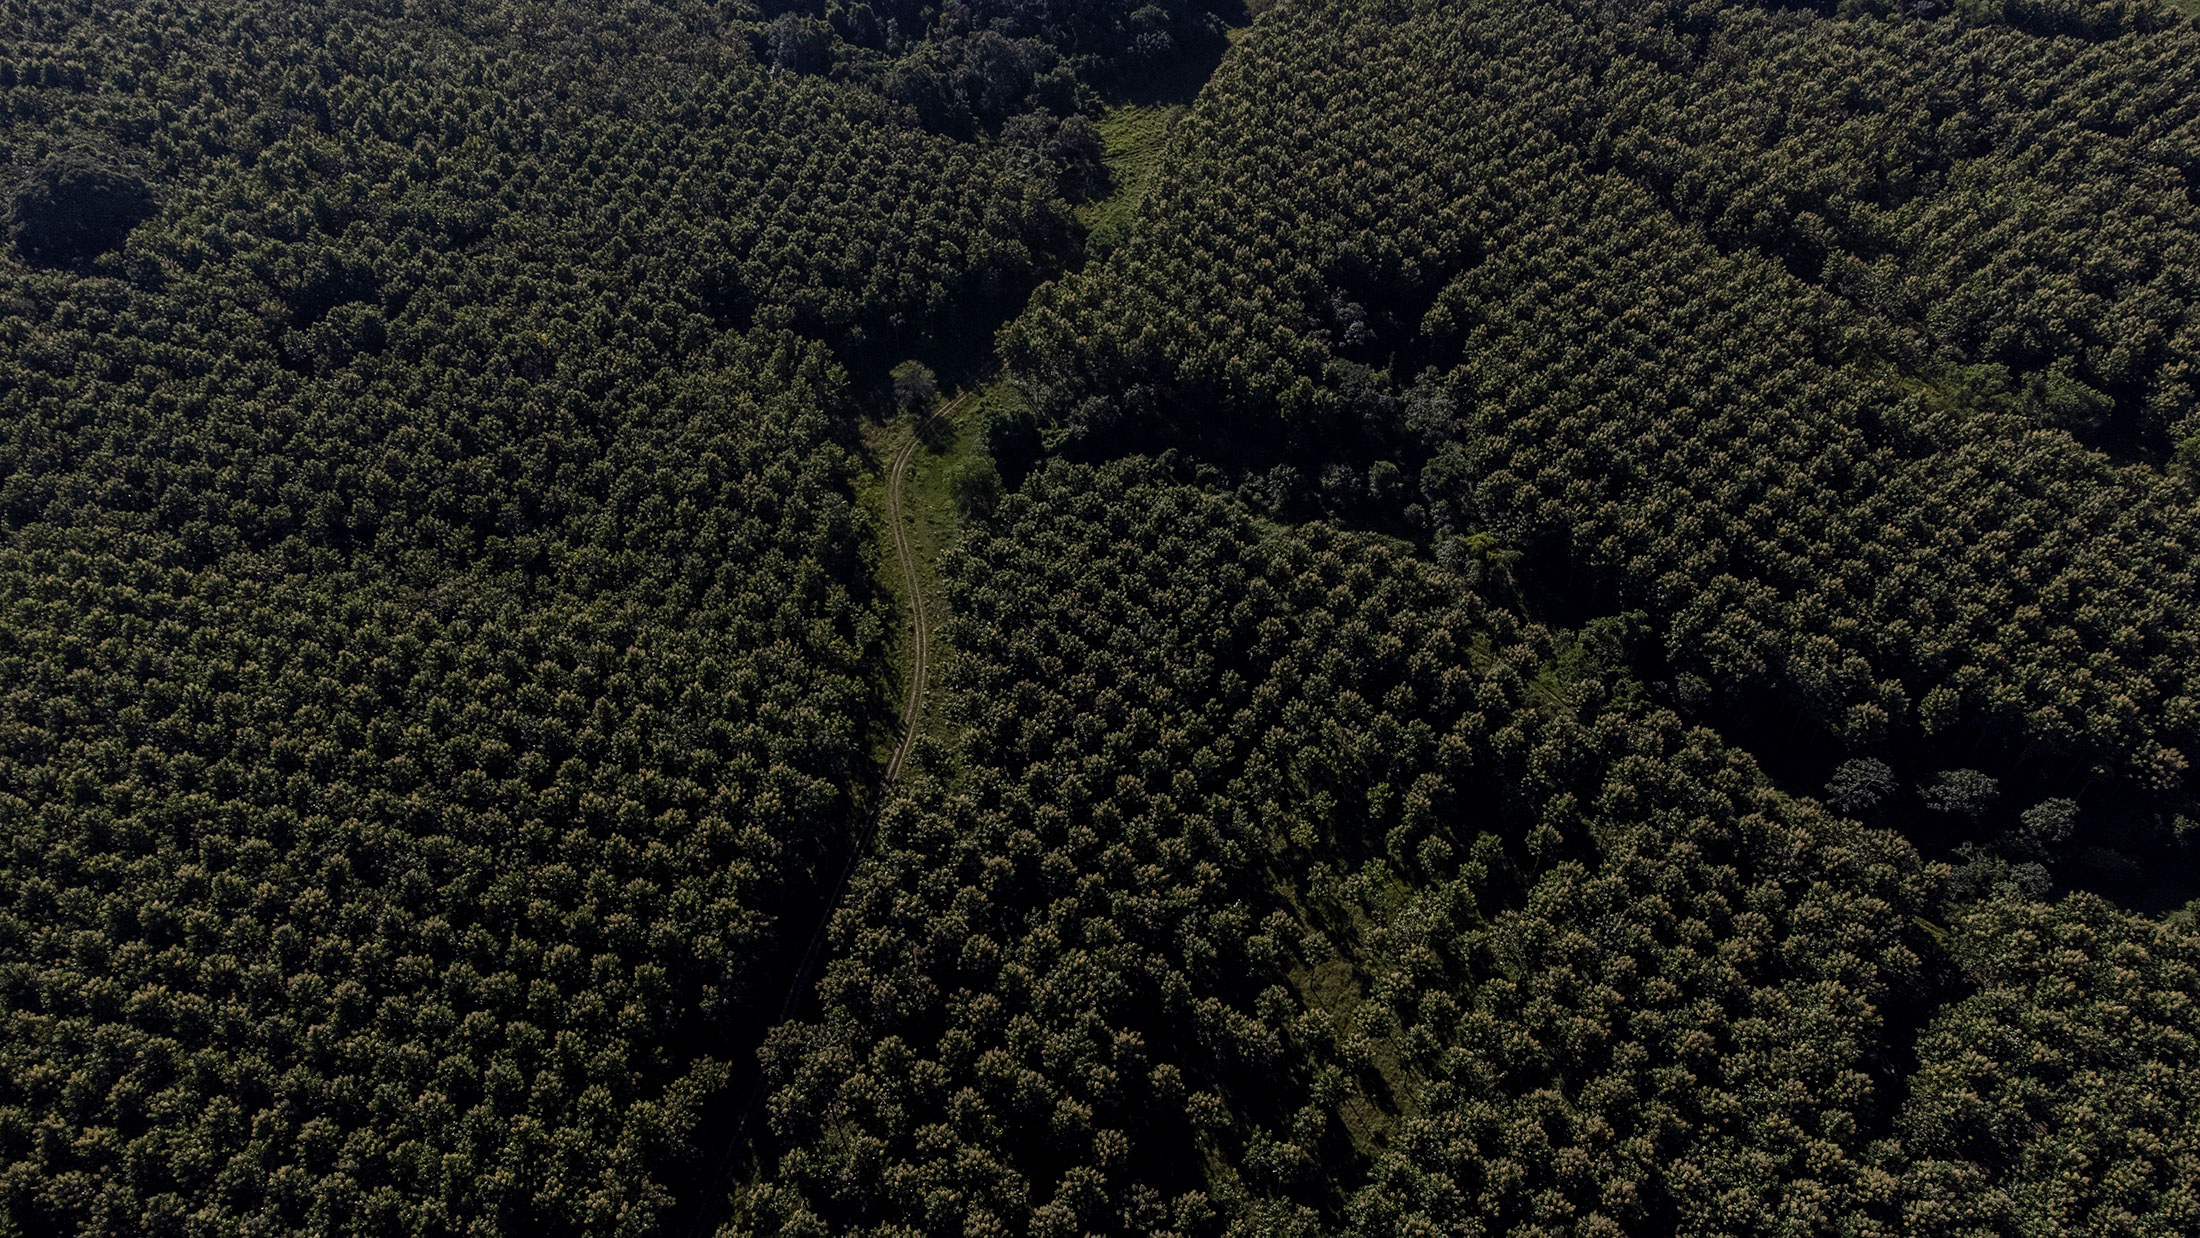 A teak plantation&nbsp;in Palenque, Chiapas. The trees were planted years before South Pole helped a forestry firm claim&nbsp;carbon offsets.